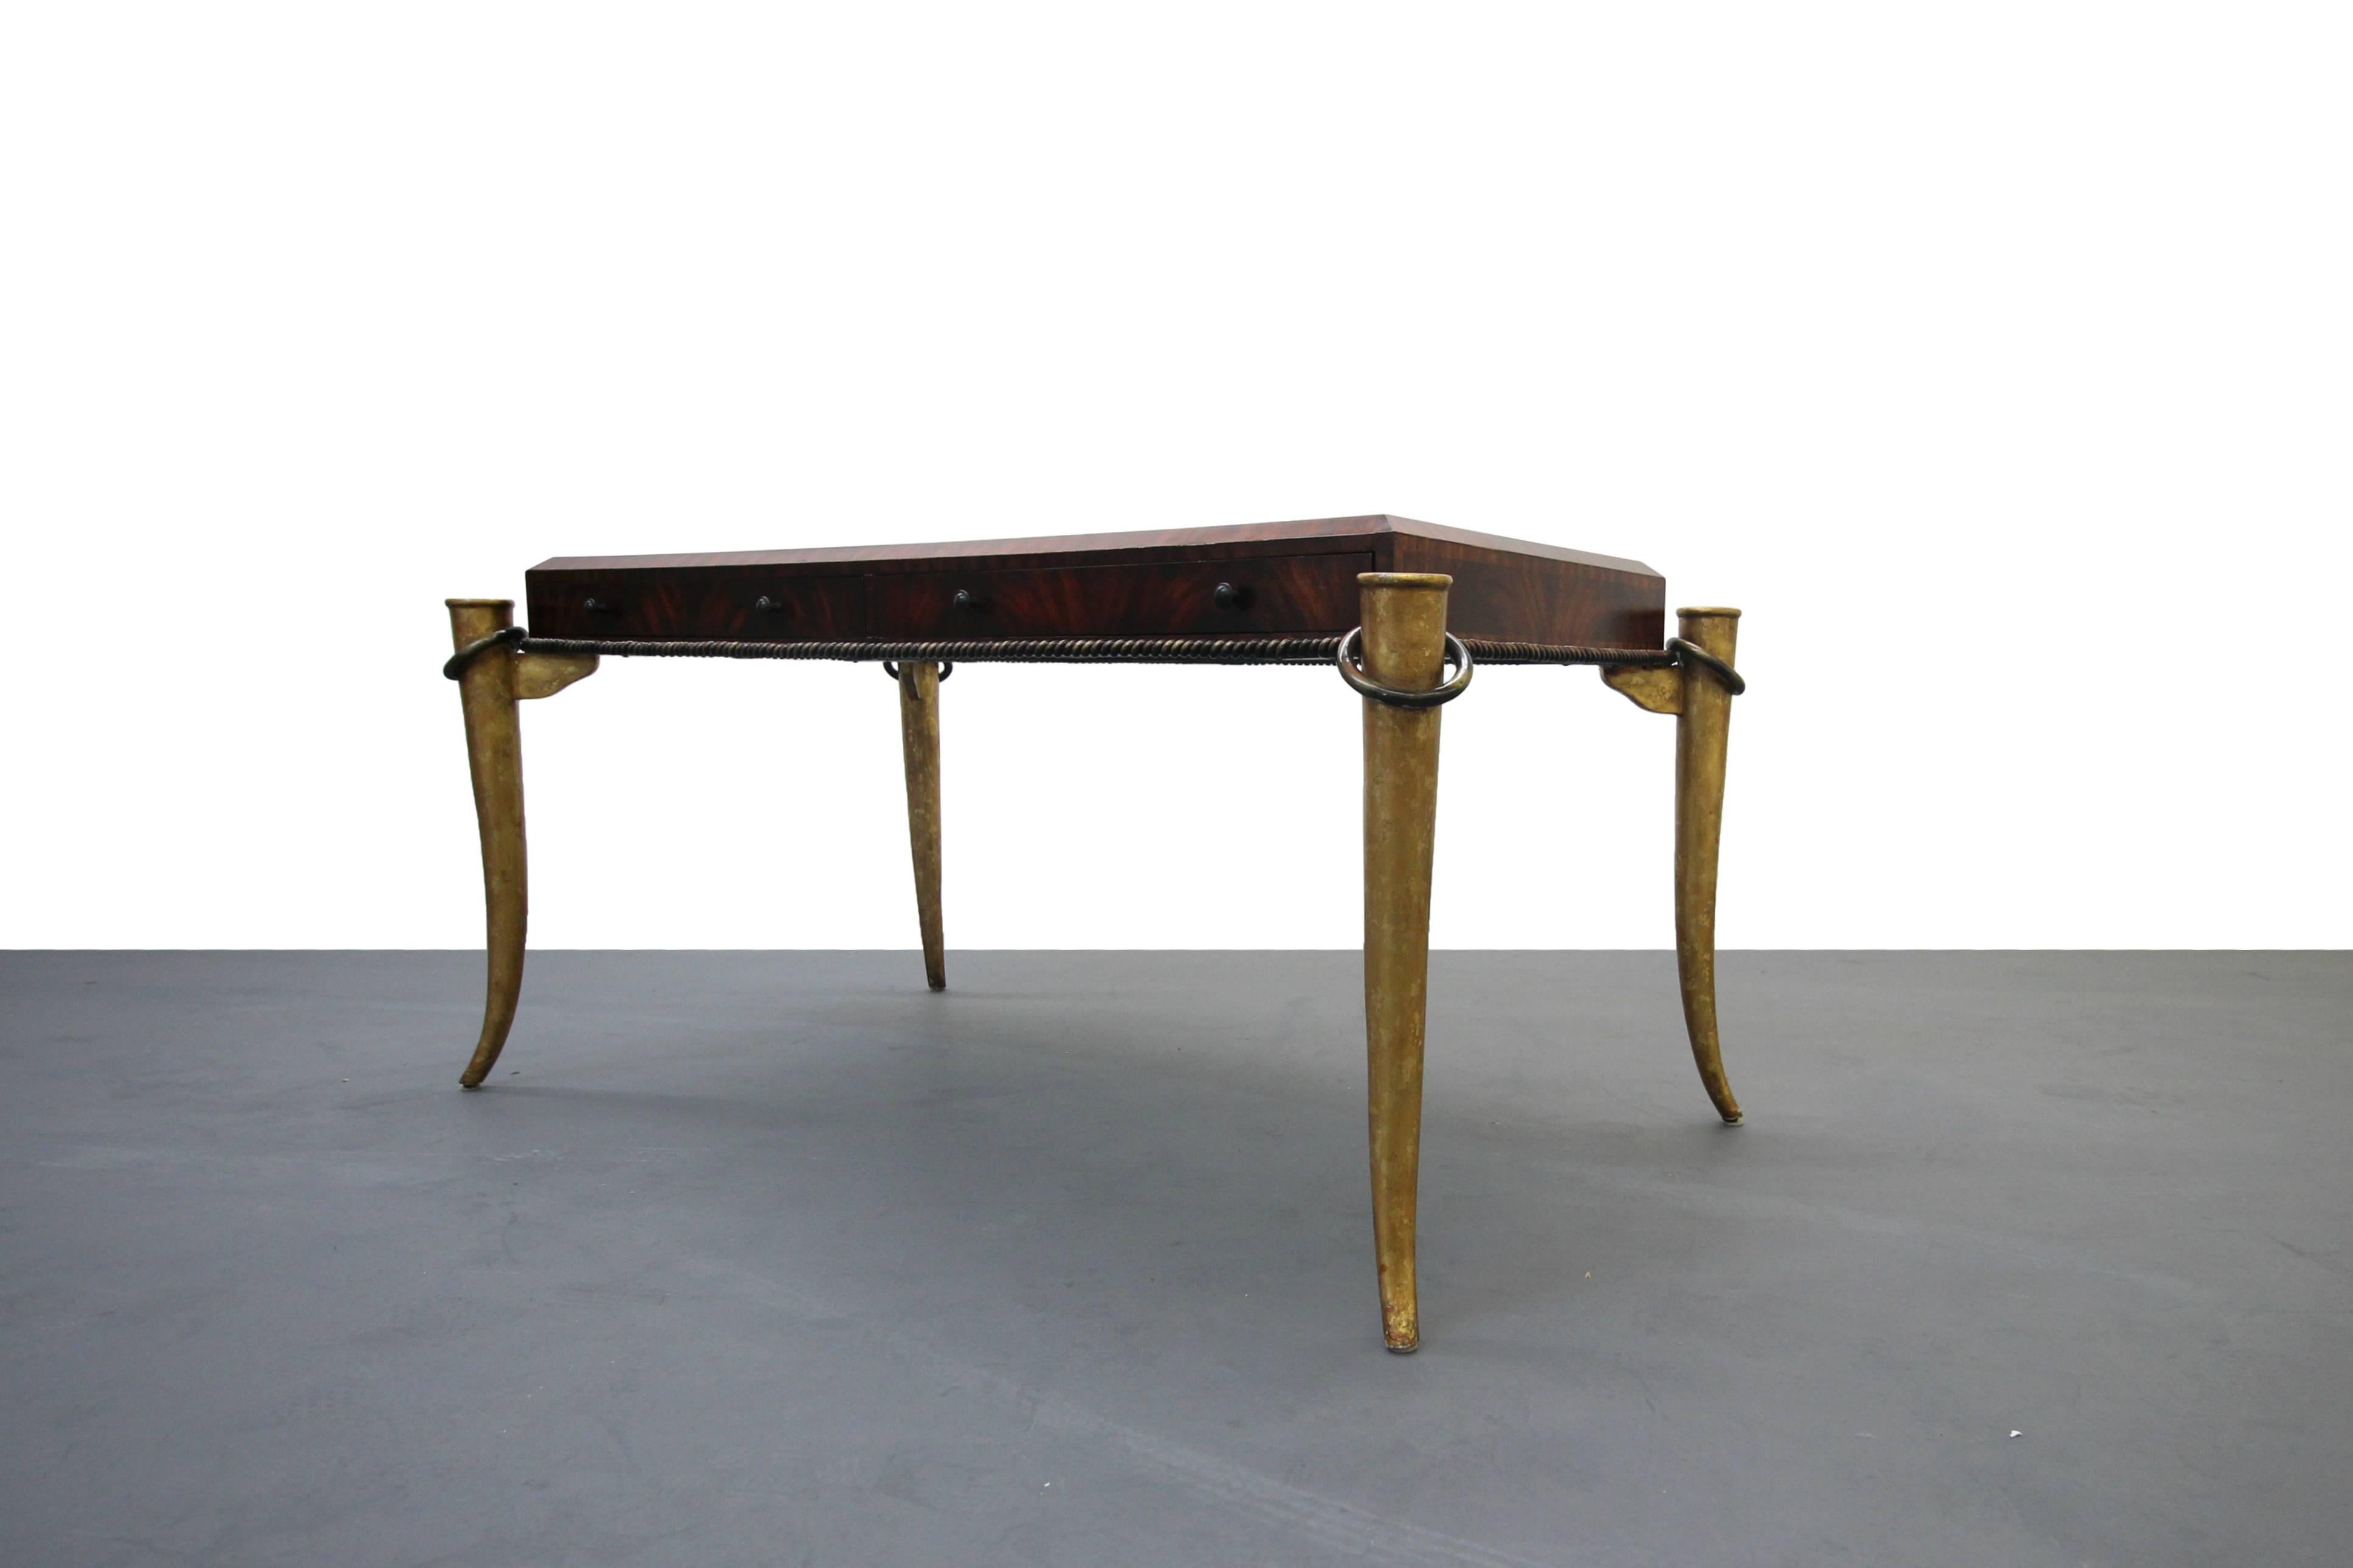 This is an absolutely stunning example of Maitland Smith's finest work. This desk features an amazingly bookmatched mahogany top laid out in the most striking pattern, resting on solid metal tusk legs finished in beautiful gold gilt, it is finished